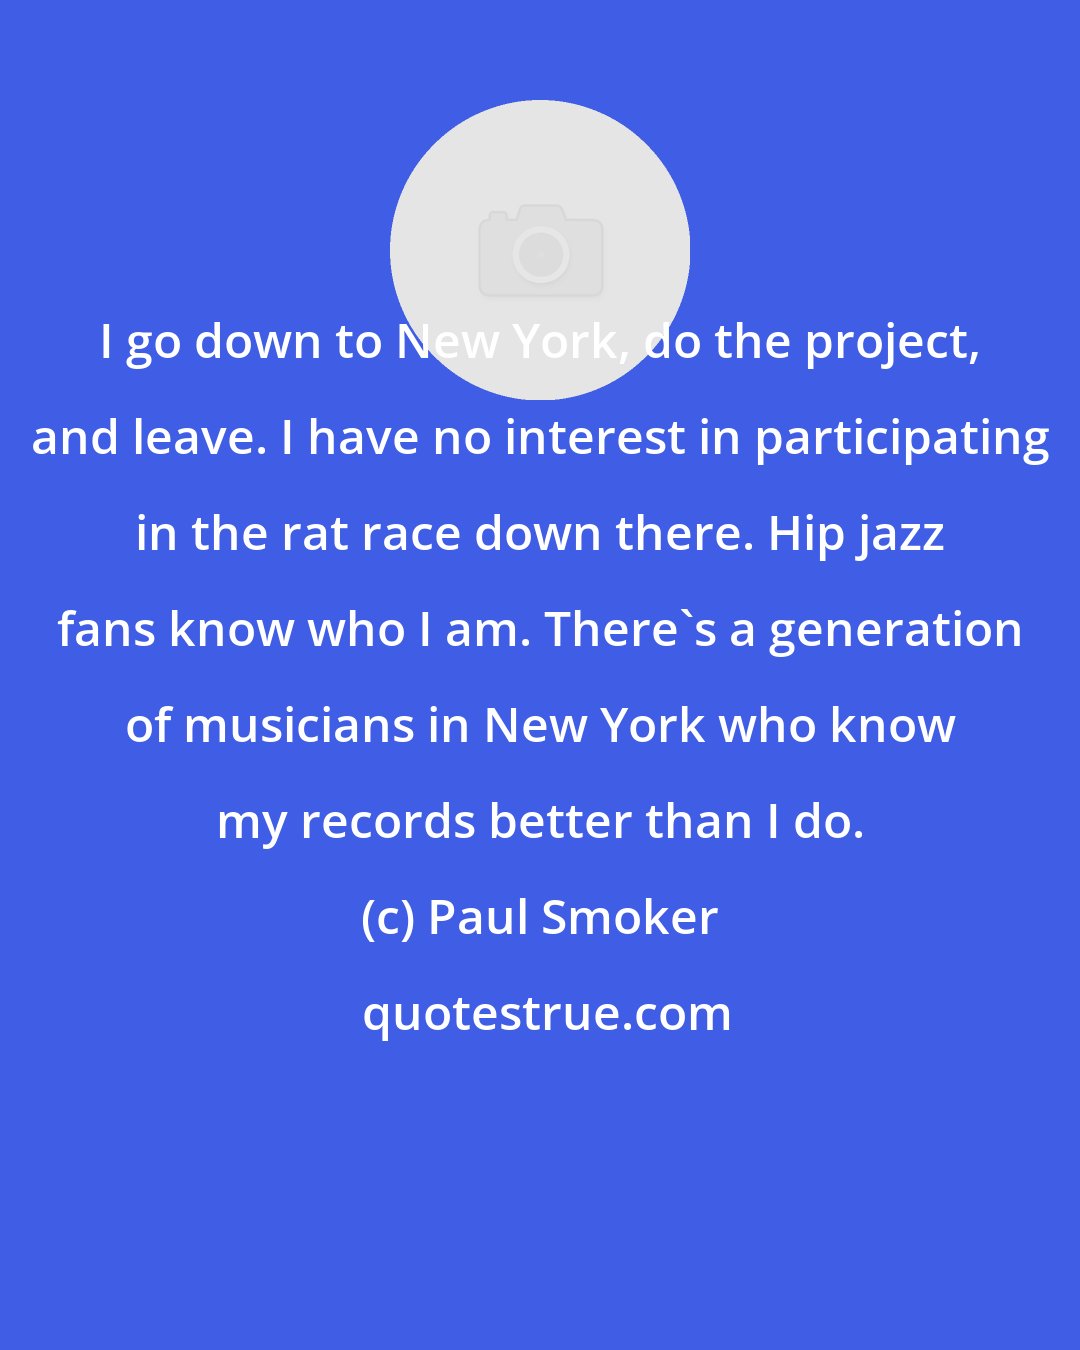 Paul Smoker: I go down to New York, do the project, and leave. I have no interest in participating in the rat race down there. Hip jazz fans know who I am. There's a generation of musicians in New York who know my records better than I do.